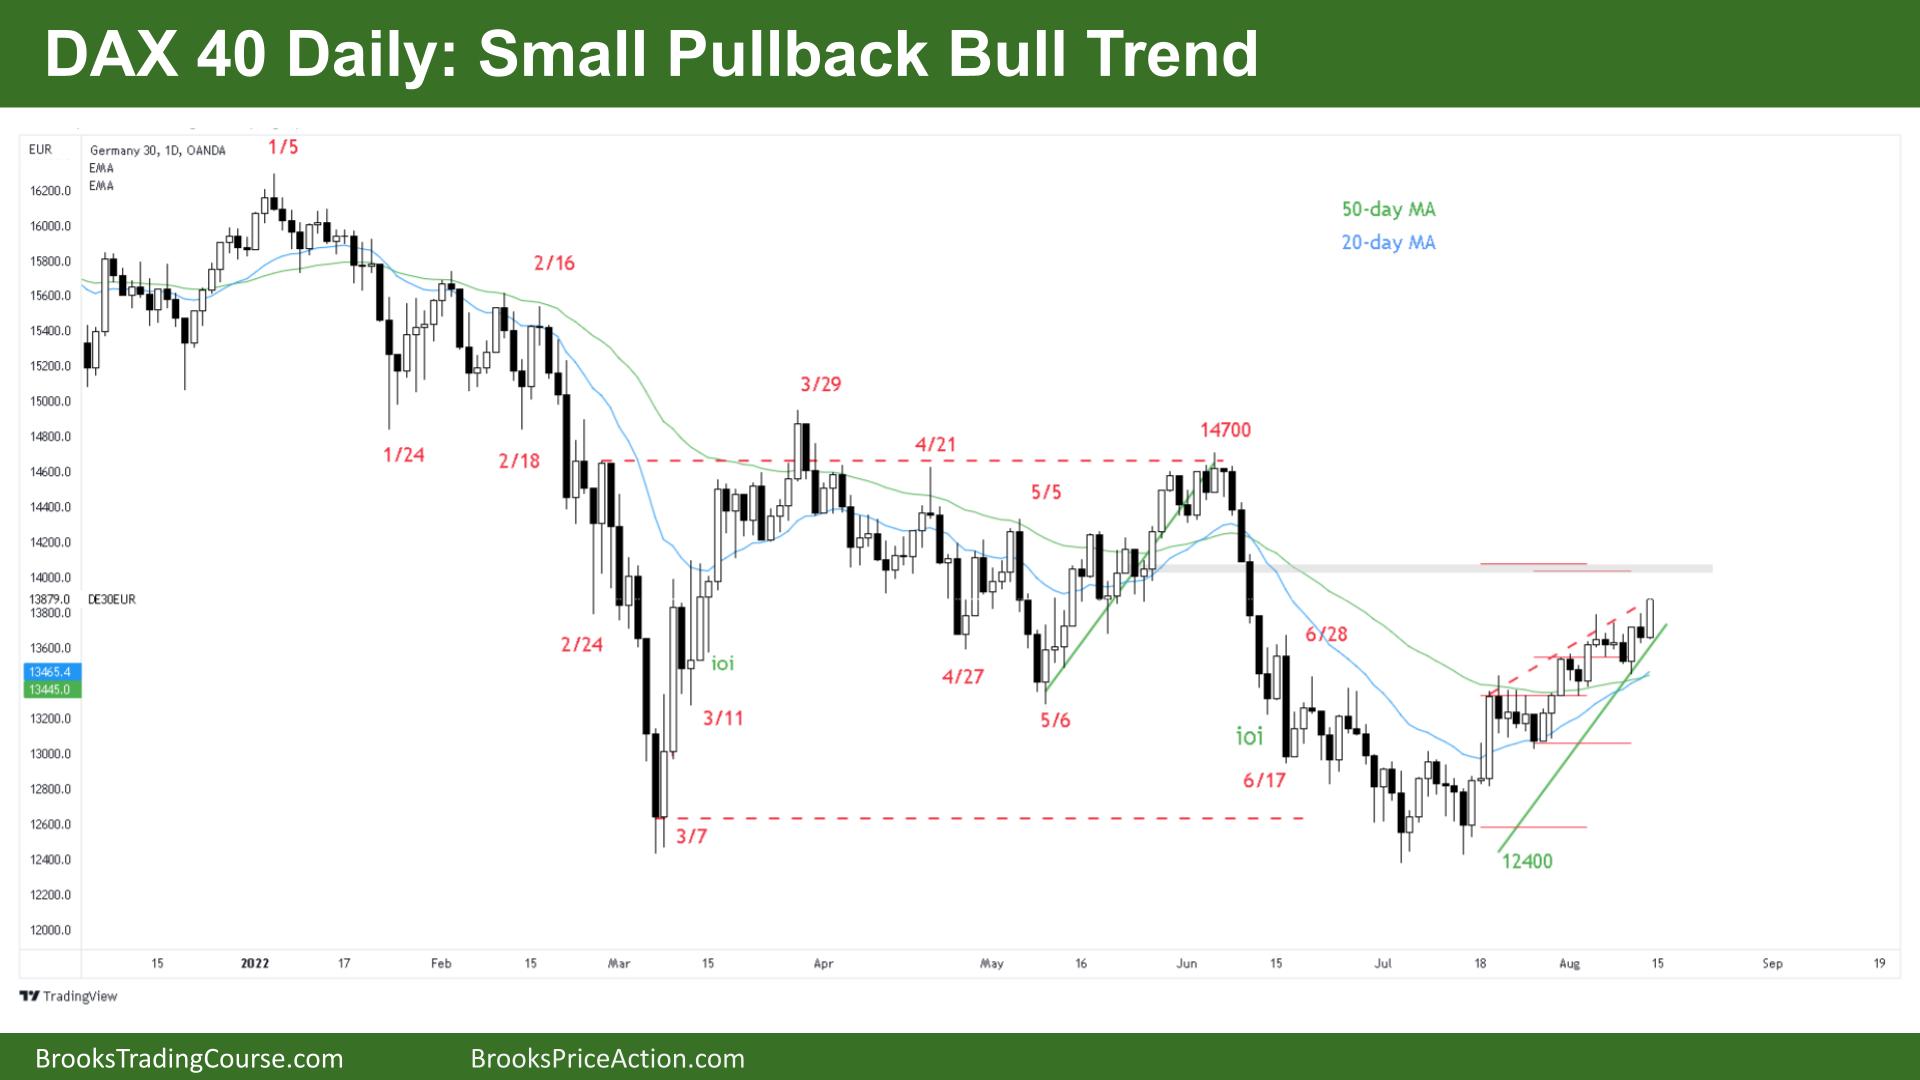 DAX 40 Daily Small Pullback Bull Trend on Daily Chart